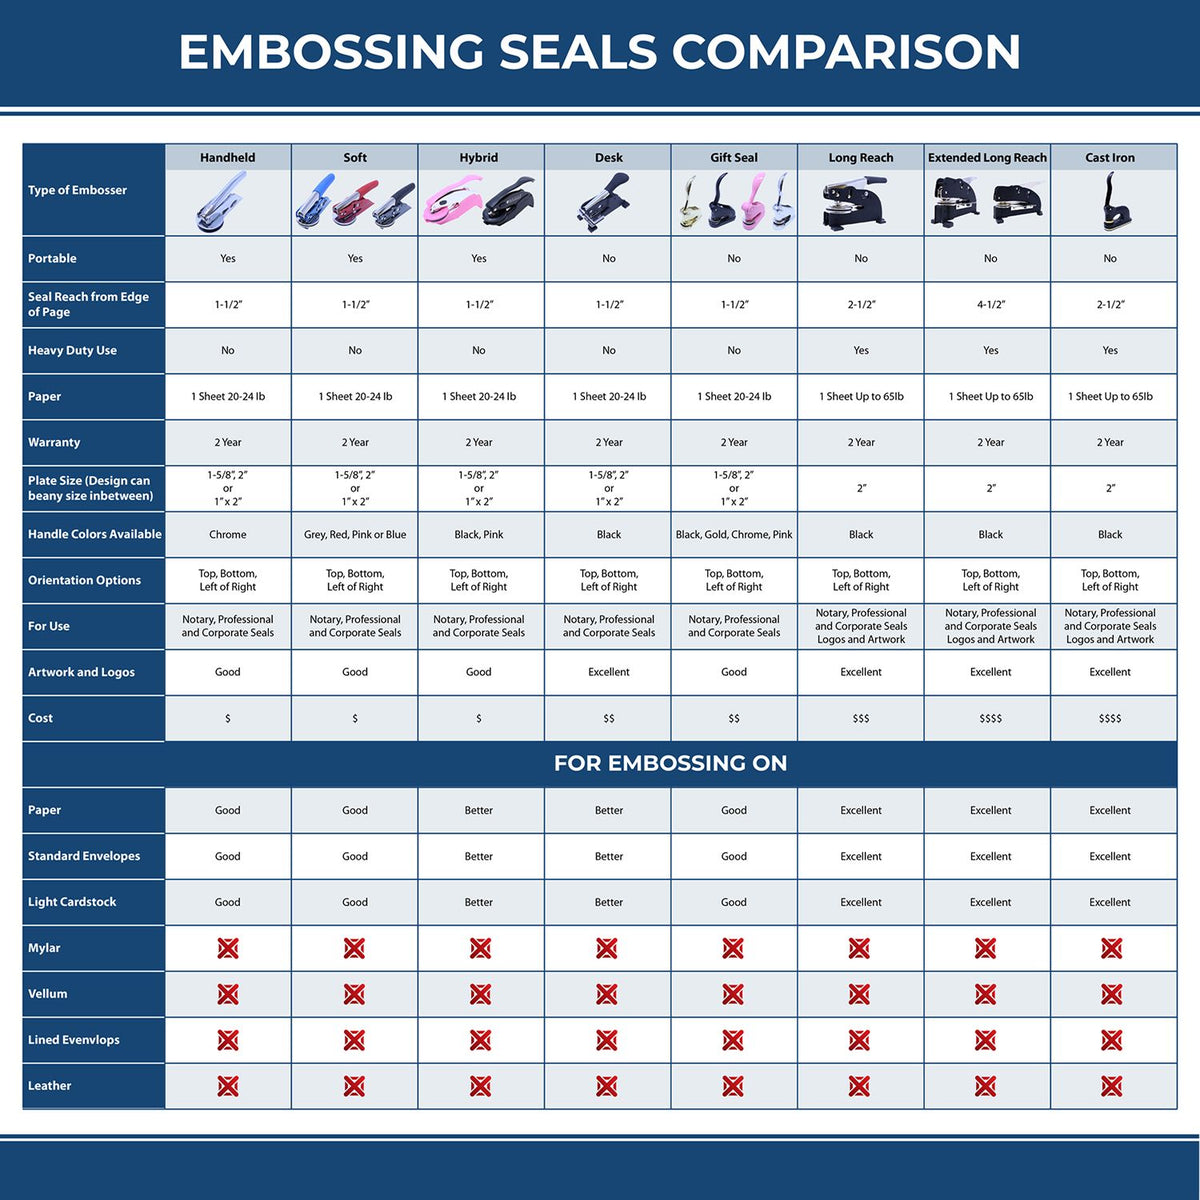 A comparison chart for the different types of mount models available for the Extended Long Reach Hawaii Architect Seal Embosser.